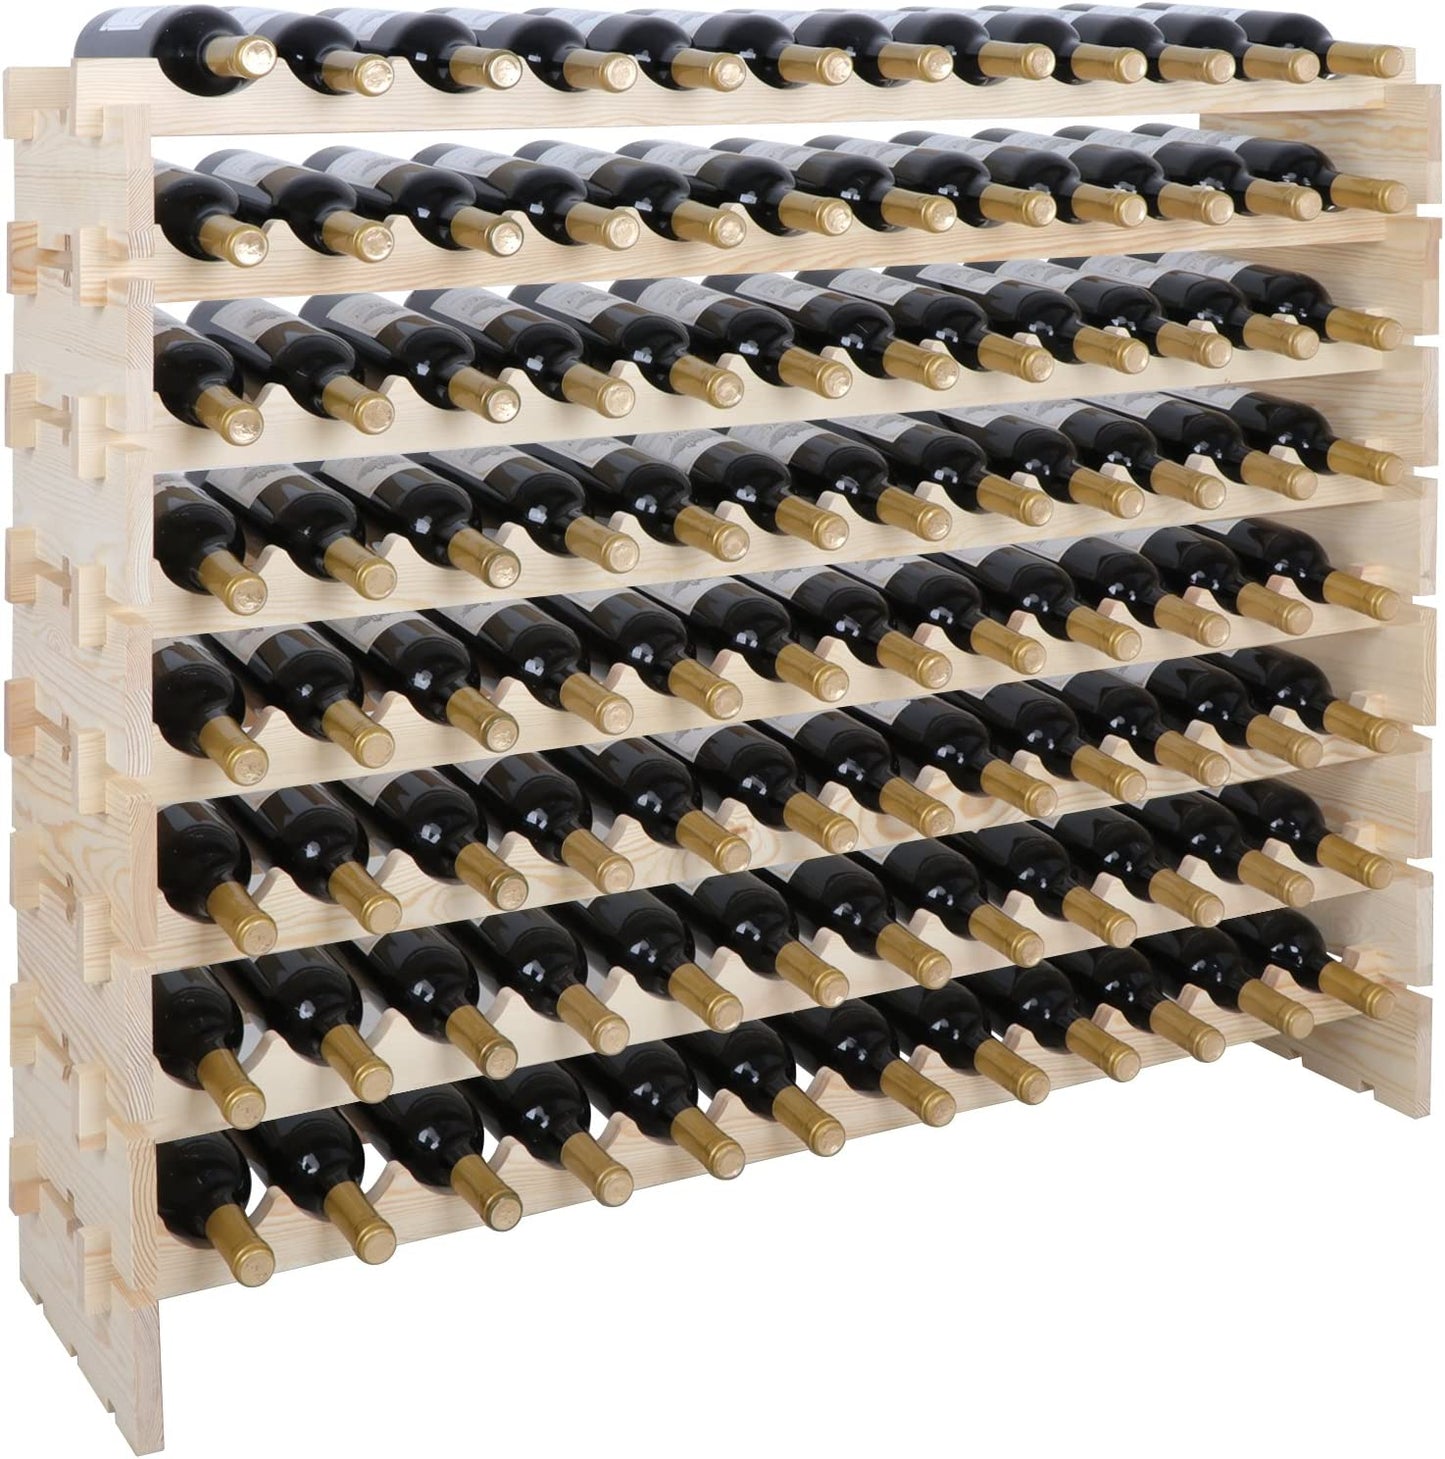 Large 96 Bottles Wood Wine Rack Stackable Storage Across up to 8 Rows Solid Wooden Display Shelves Rack Organizer